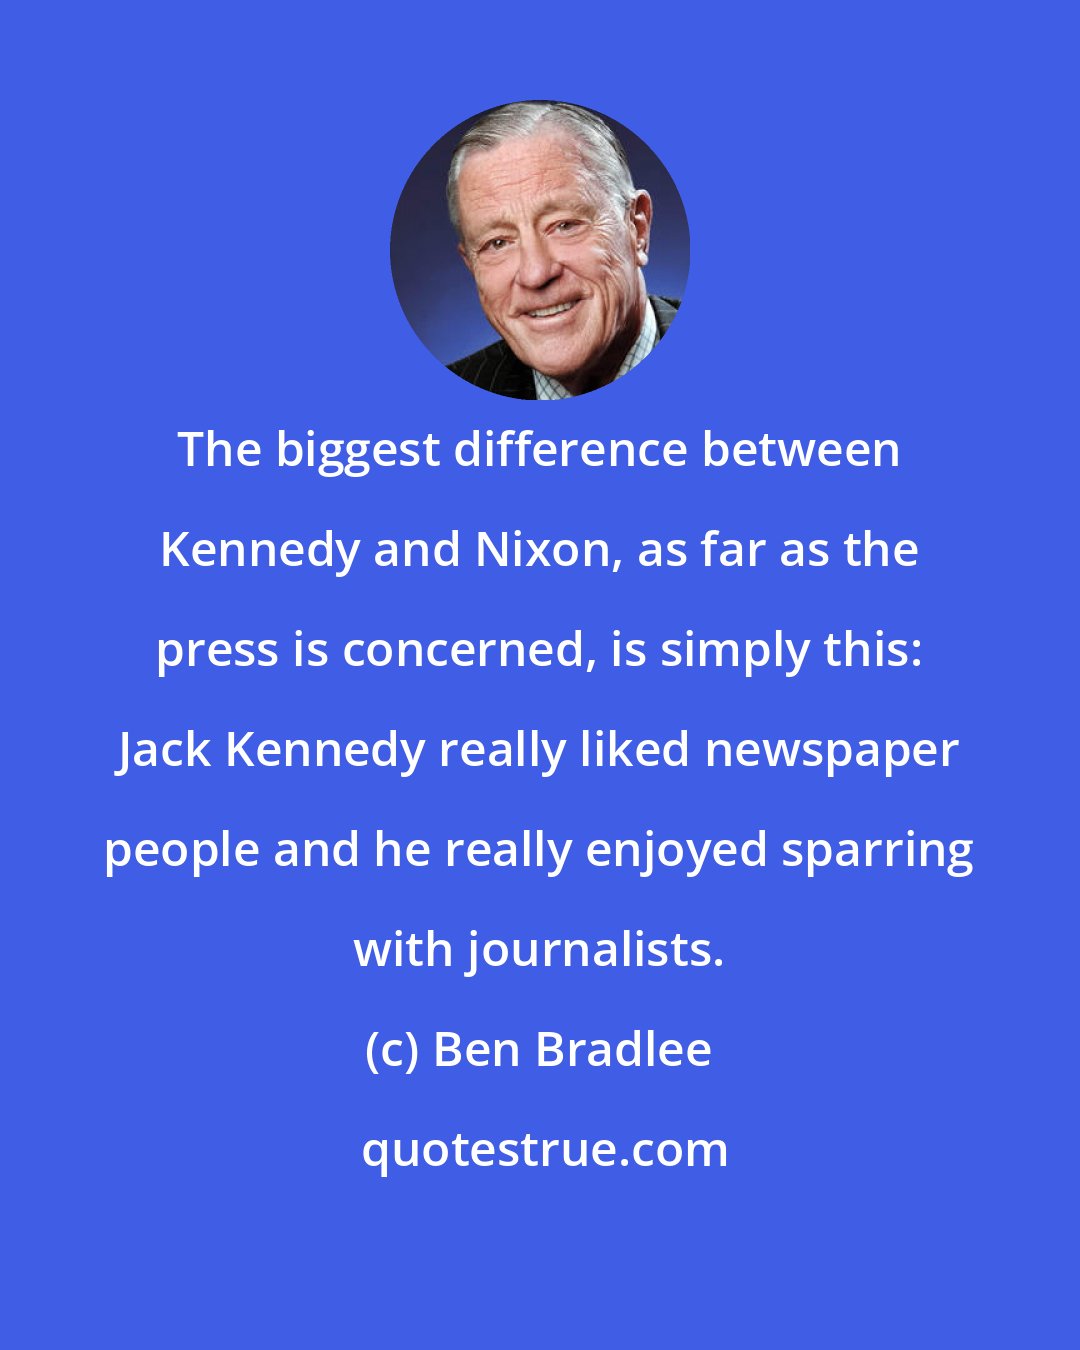 Ben Bradlee: The biggest difference between Kennedy and Nixon, as far as the press is concerned, is simply this: Jack Kennedy really liked newspaper people and he really enjoyed sparring with journalists.